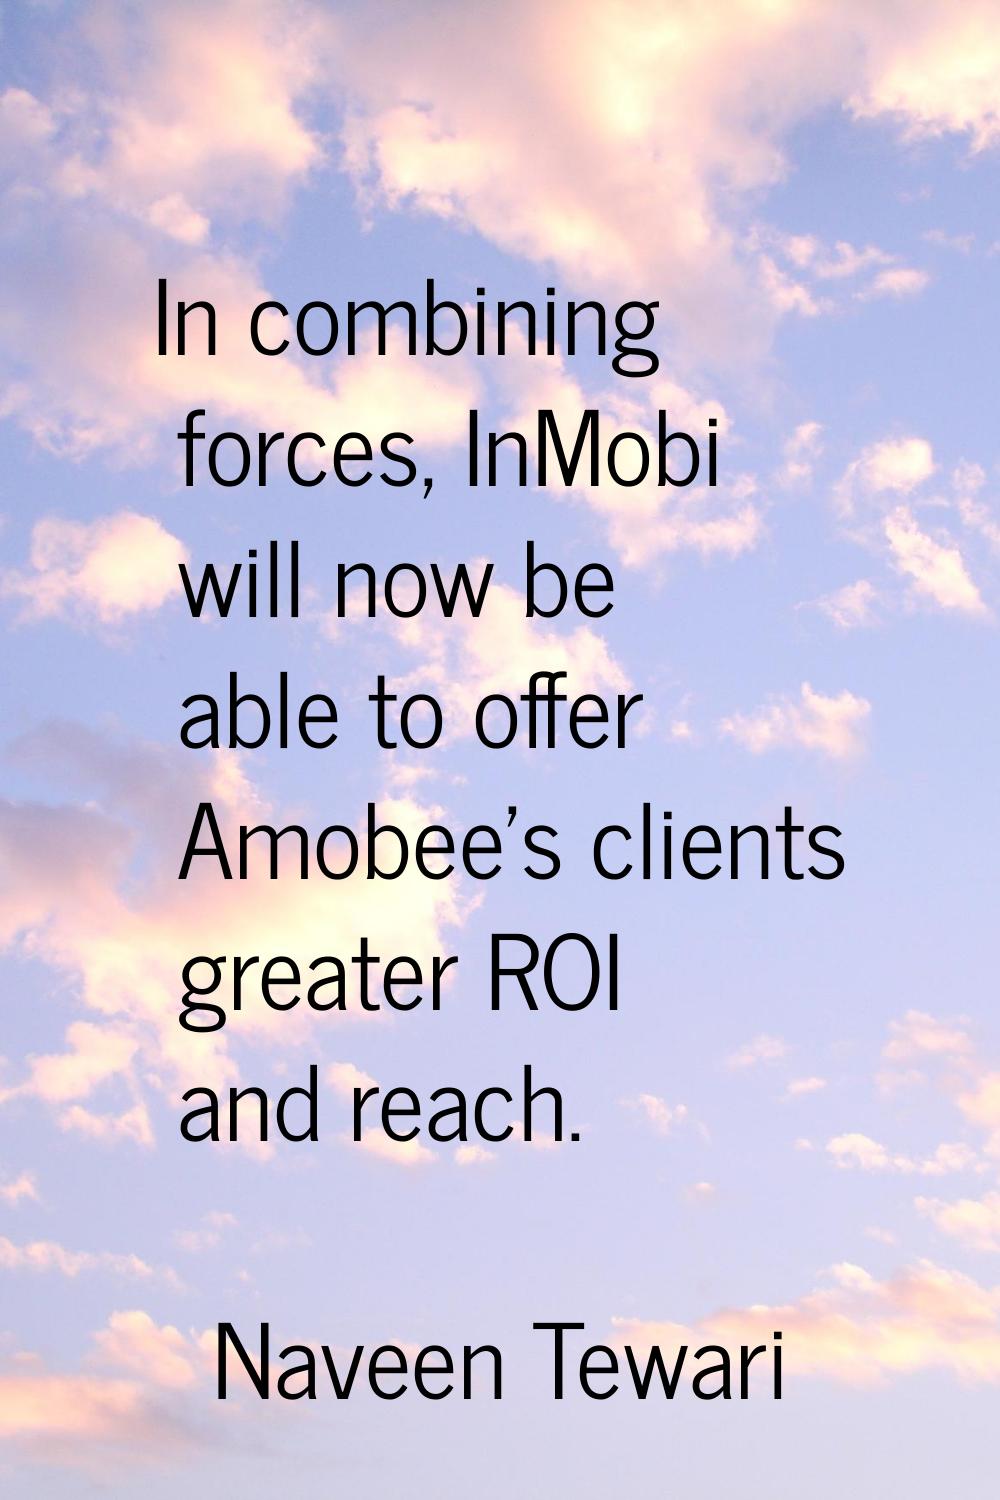 In combining forces, InMobi will now be able to offer Amobee's clients greater ROI and reach.